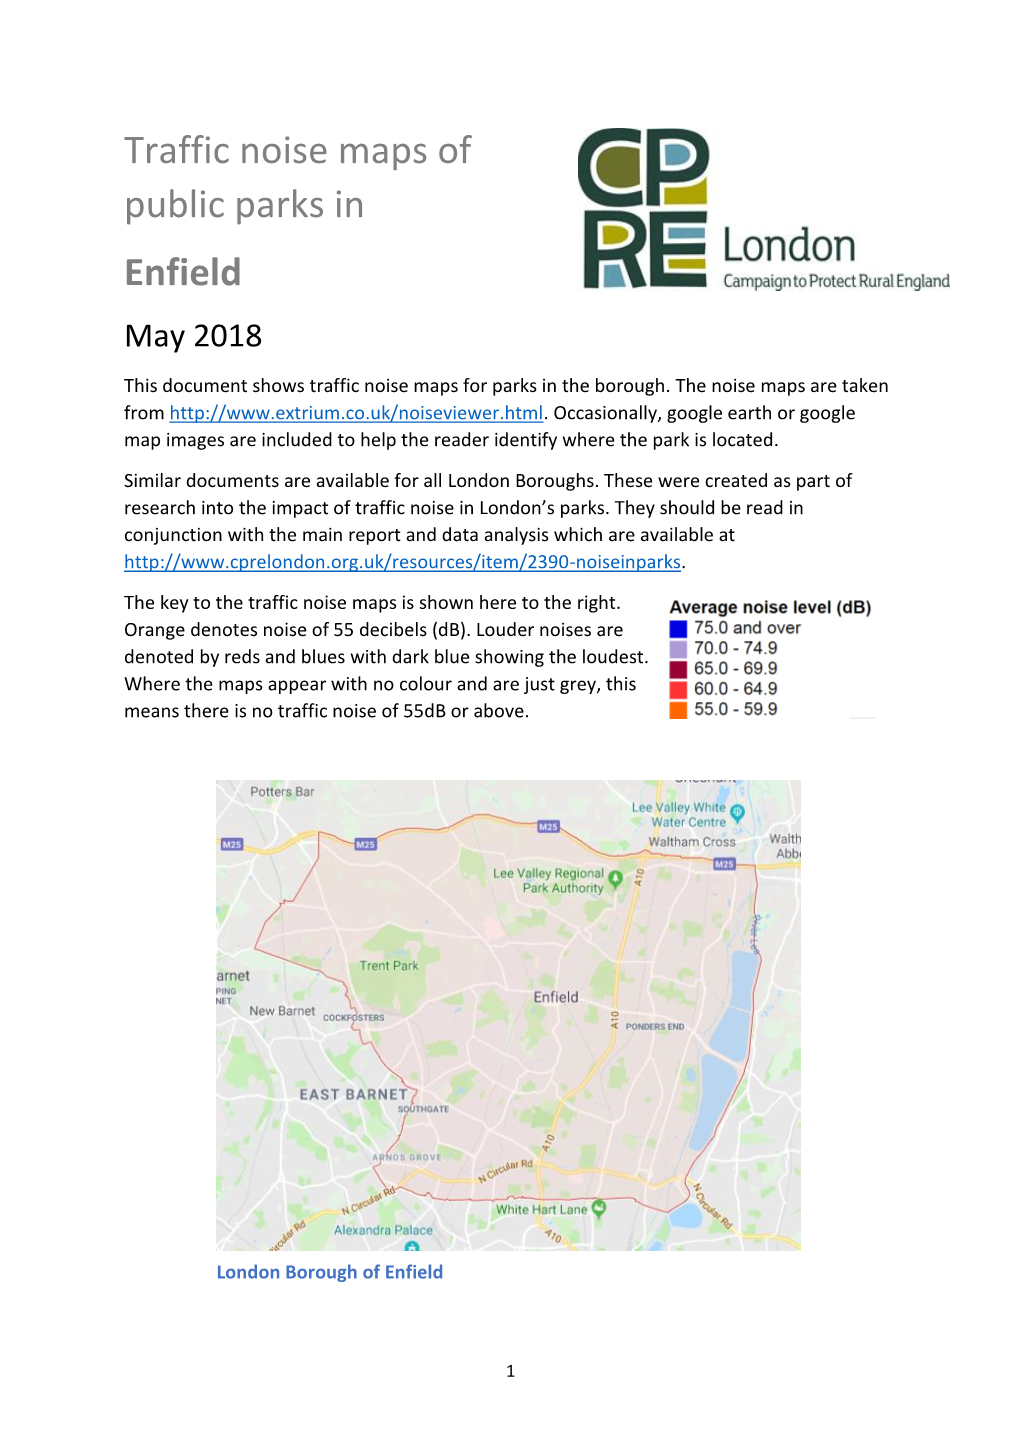 Traffic Noise Maps of Public Parks in Enfield May 2018